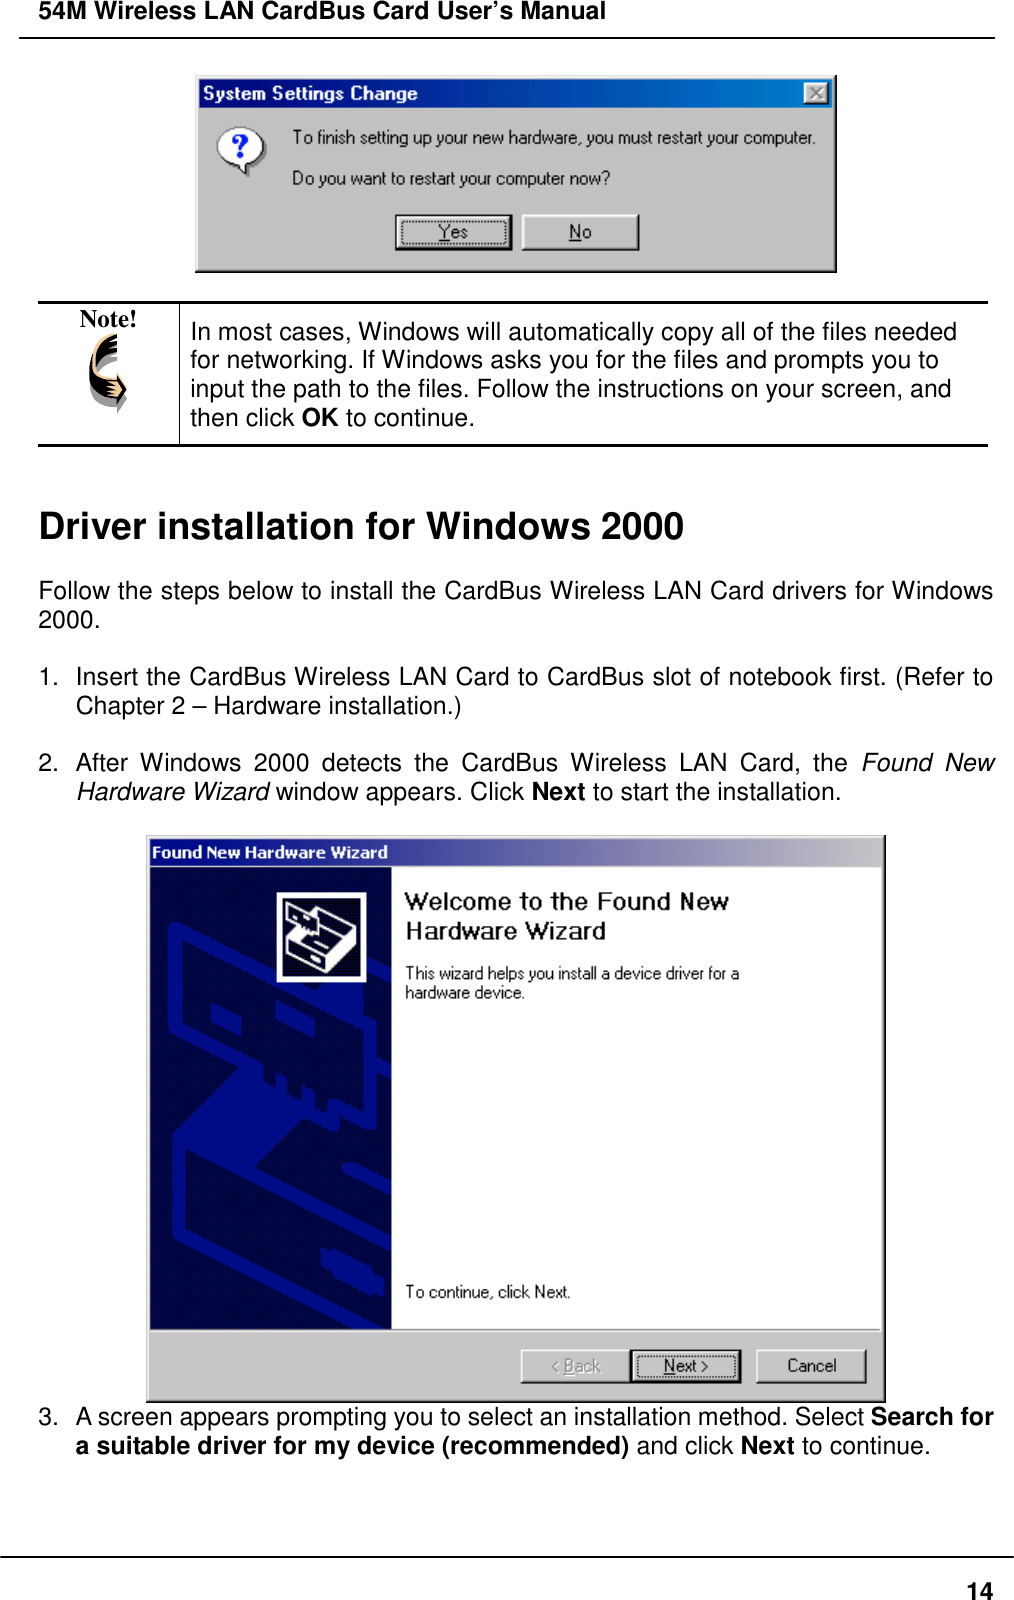 54M Wireless LAN CardBus Card User’s Manual14Note! In most cases, Windows will automatically copy all of the files neededfor networking. If Windows asks you for the files and prompts you toinput the path to the files. Follow the instructions on your screen, andthen click OK to continue.Driver installation for Windows 2000Follow the steps below to install the CardBus Wireless LAN Card drivers for Windows2000.1.  Insert the CardBus Wireless LAN Card to CardBus slot of notebook first. (Refer toChapter 2 – Hardware installation.)2.  After Windows 2000 detects the CardBus Wireless LAN Card, the Found NewHardware Wizard window appears. Click Next to start the installation.3.  A screen appears prompting you to select an installation method. Select Search fora suitable driver for my device (recommended) and click Next to continue.